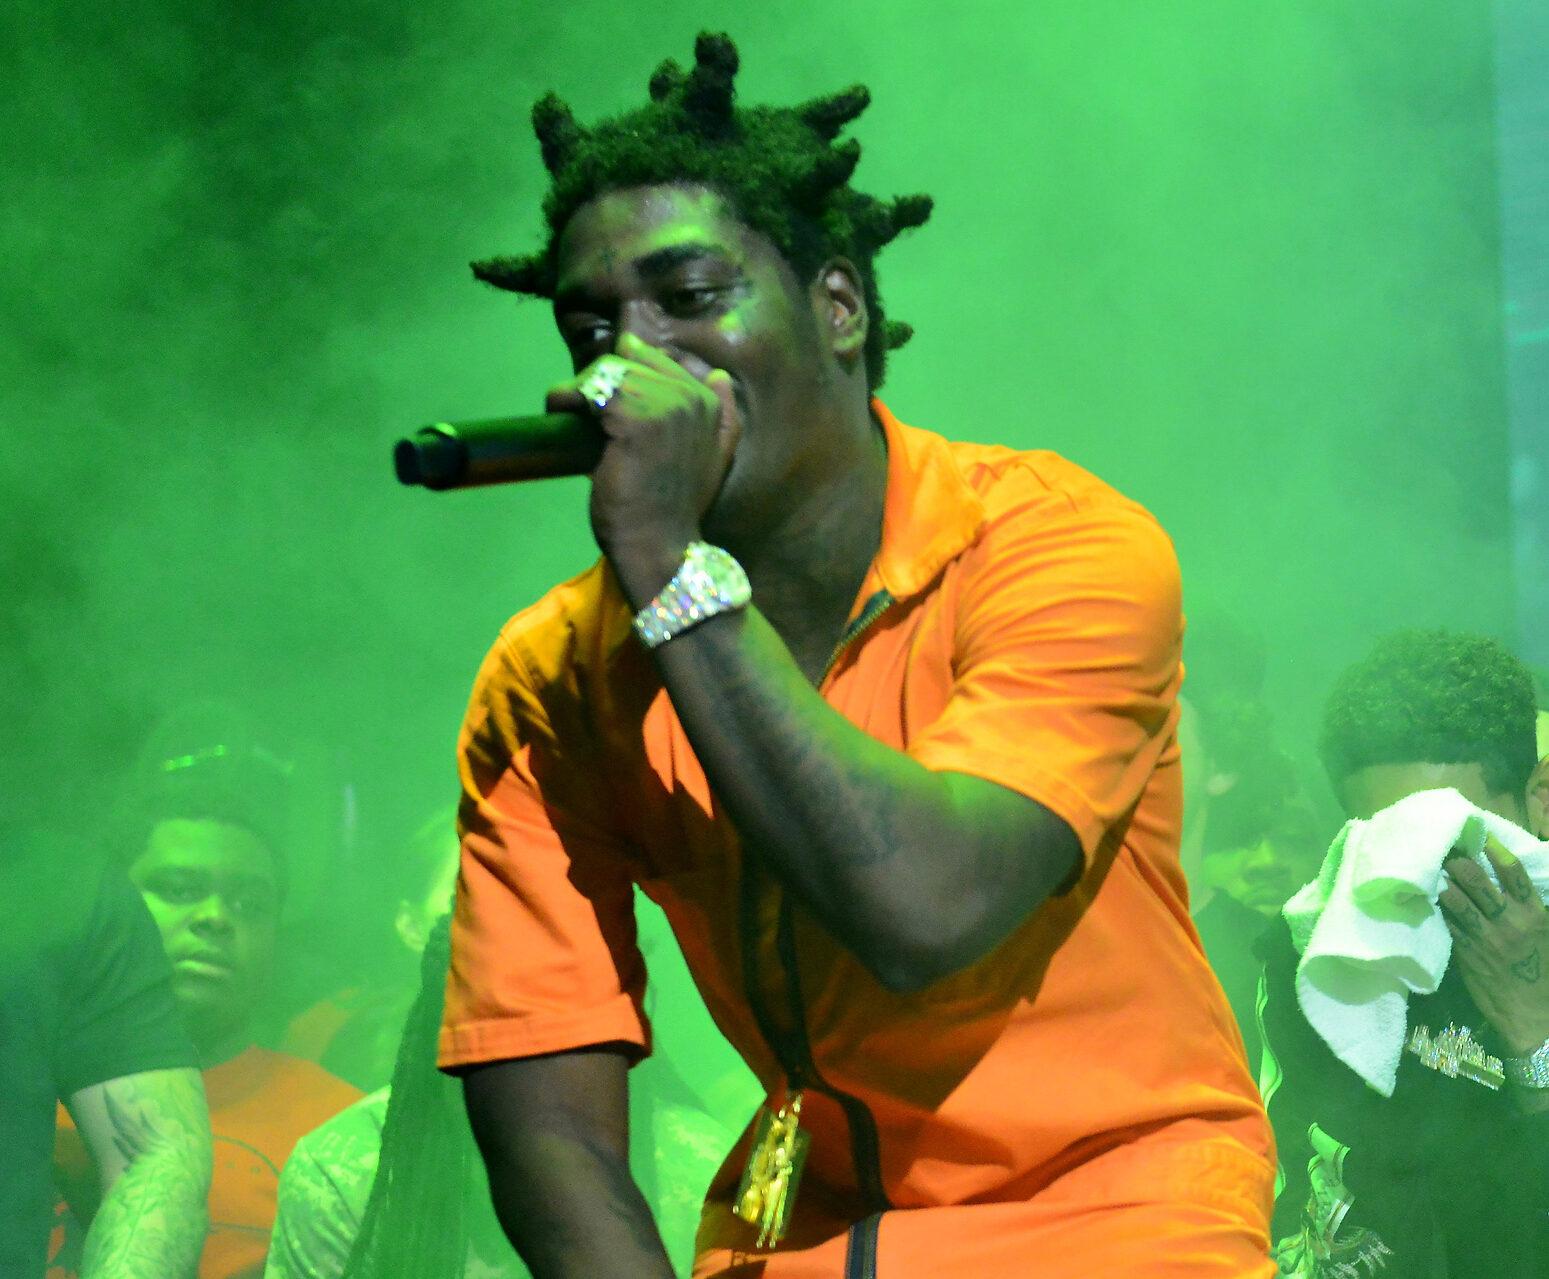 Kodak Black performs on stage at his Homecoming Concert